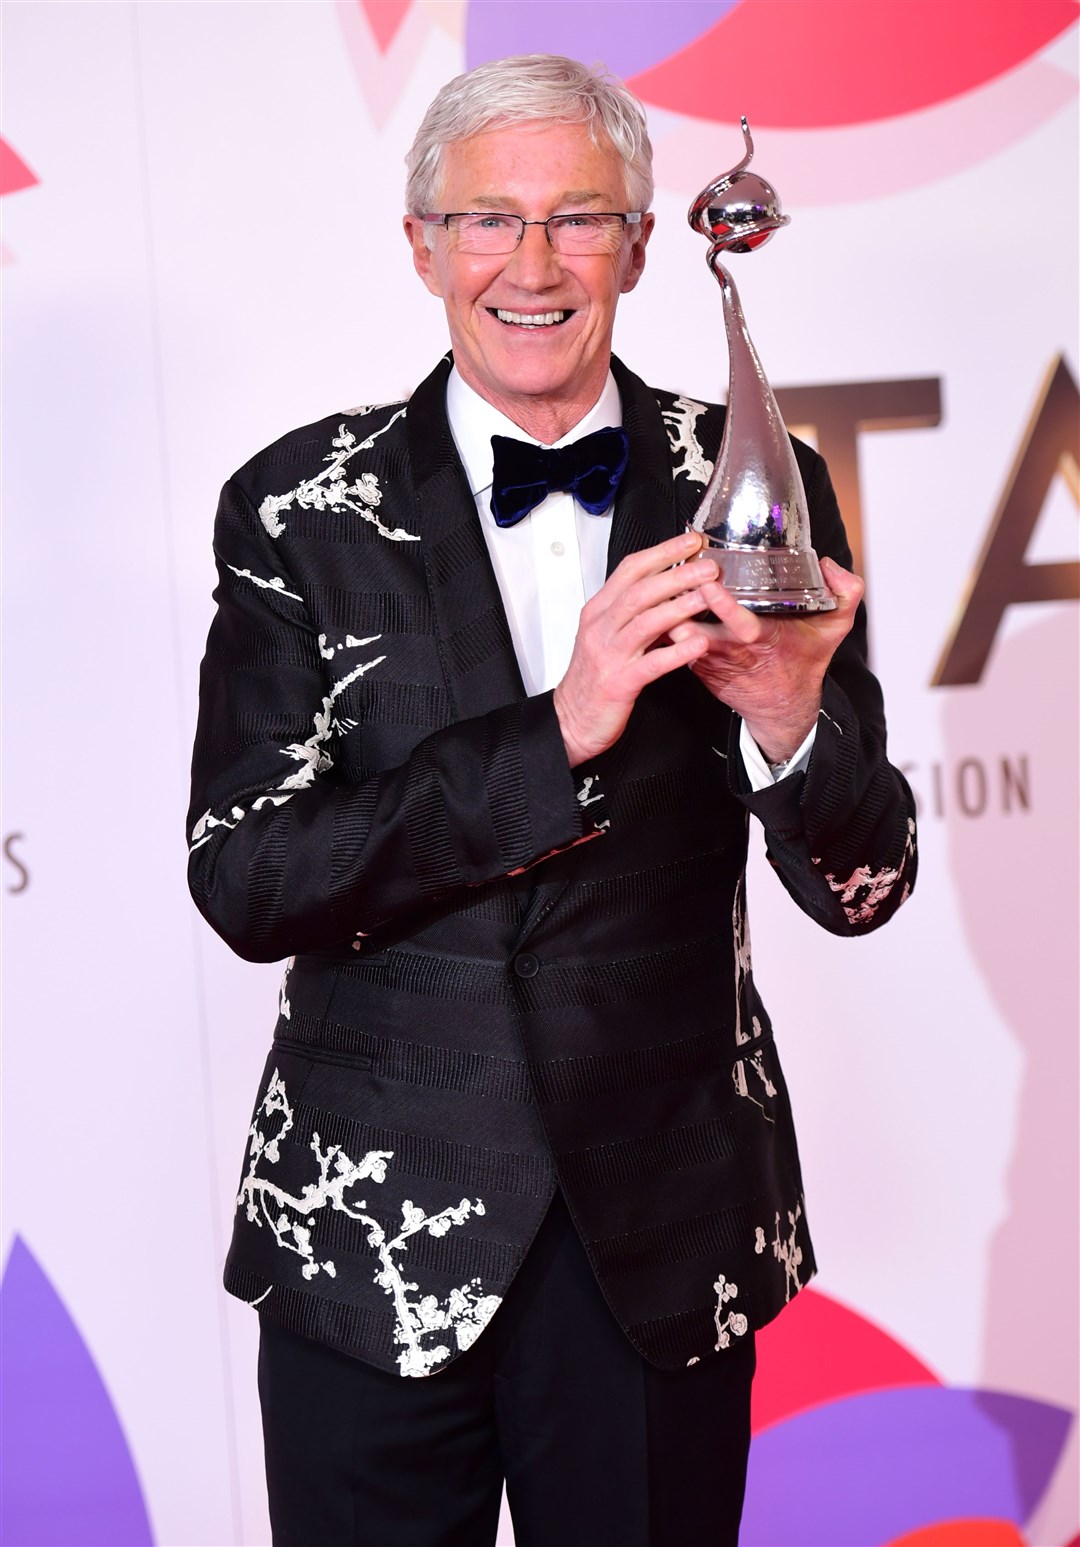 Paul O’Grady with the award for best Factual Entertainment in the Press Room at the National Television Awards 2019 held at the O2 Arena, London (PA)